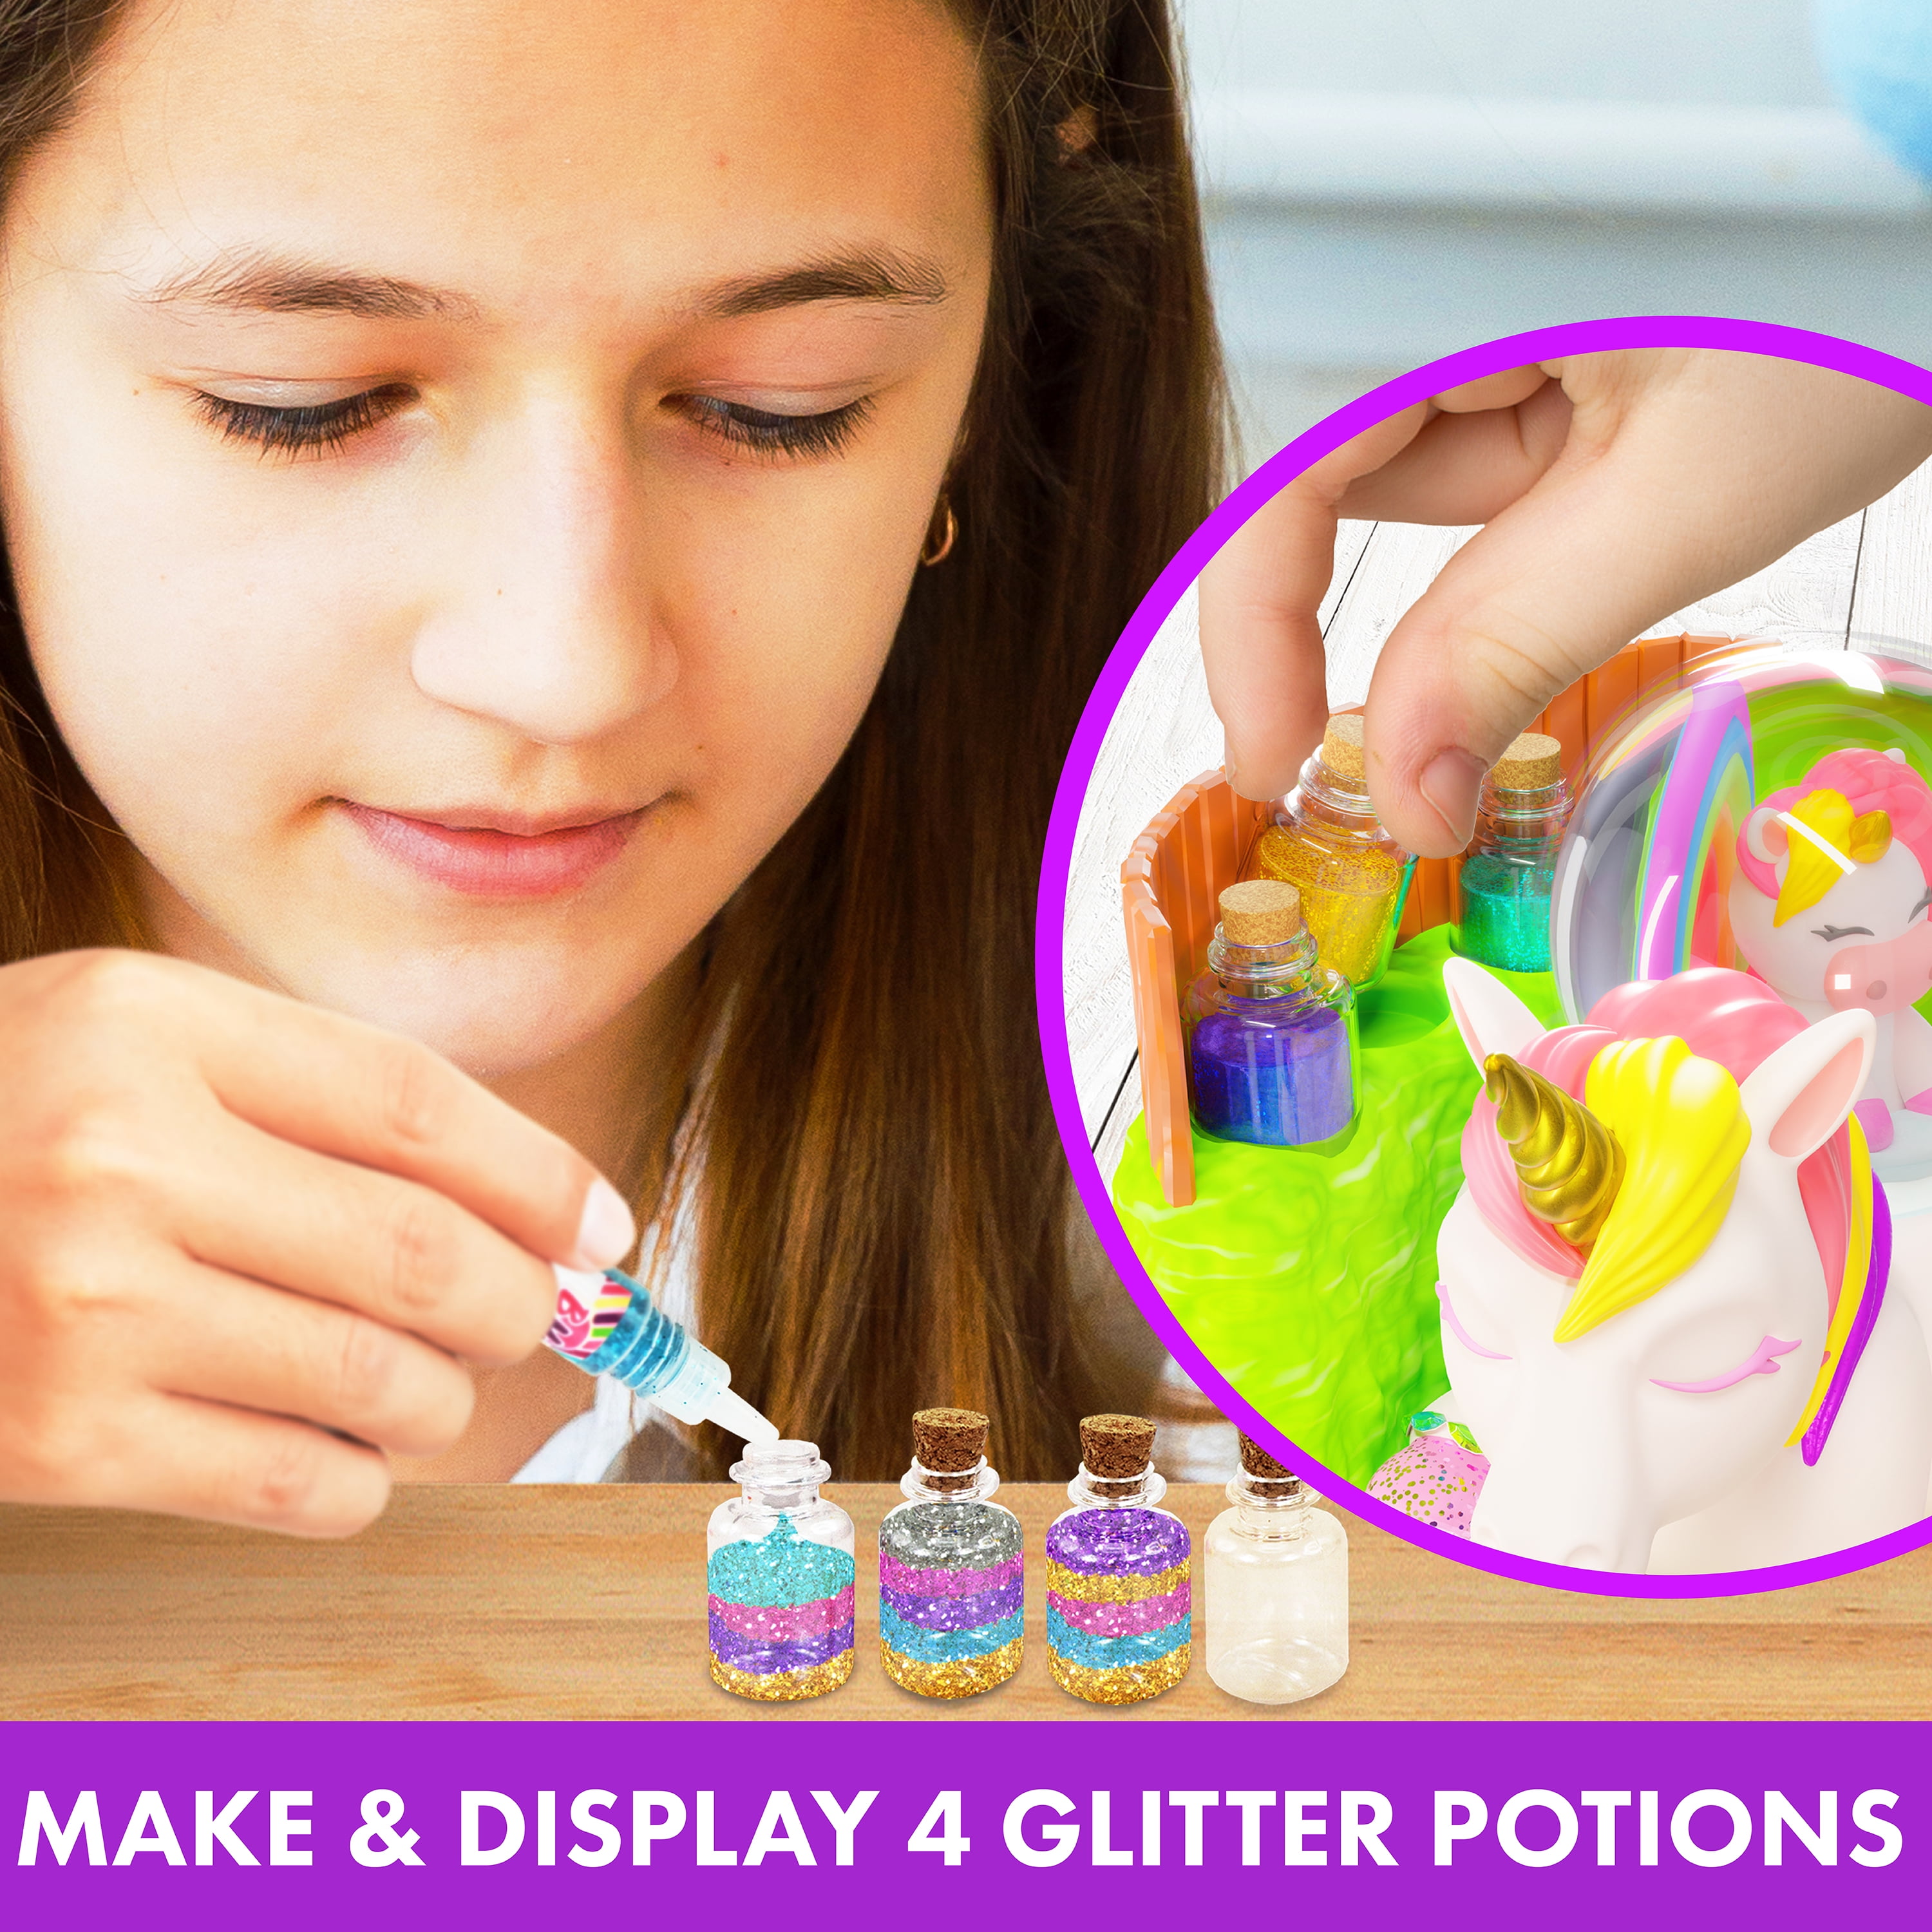 DIY Snow Globe Kids Craft Kits Set - Arts and Crafts Activities with  Unicorn Gifts for Girls Age 6-8, Animals Figurines Toys for Age 4, 5, 6, 7,  8, 9, 10, 11, 12, Art Clay Crafts for Kids Ages 4-8 - Yahoo Shopping